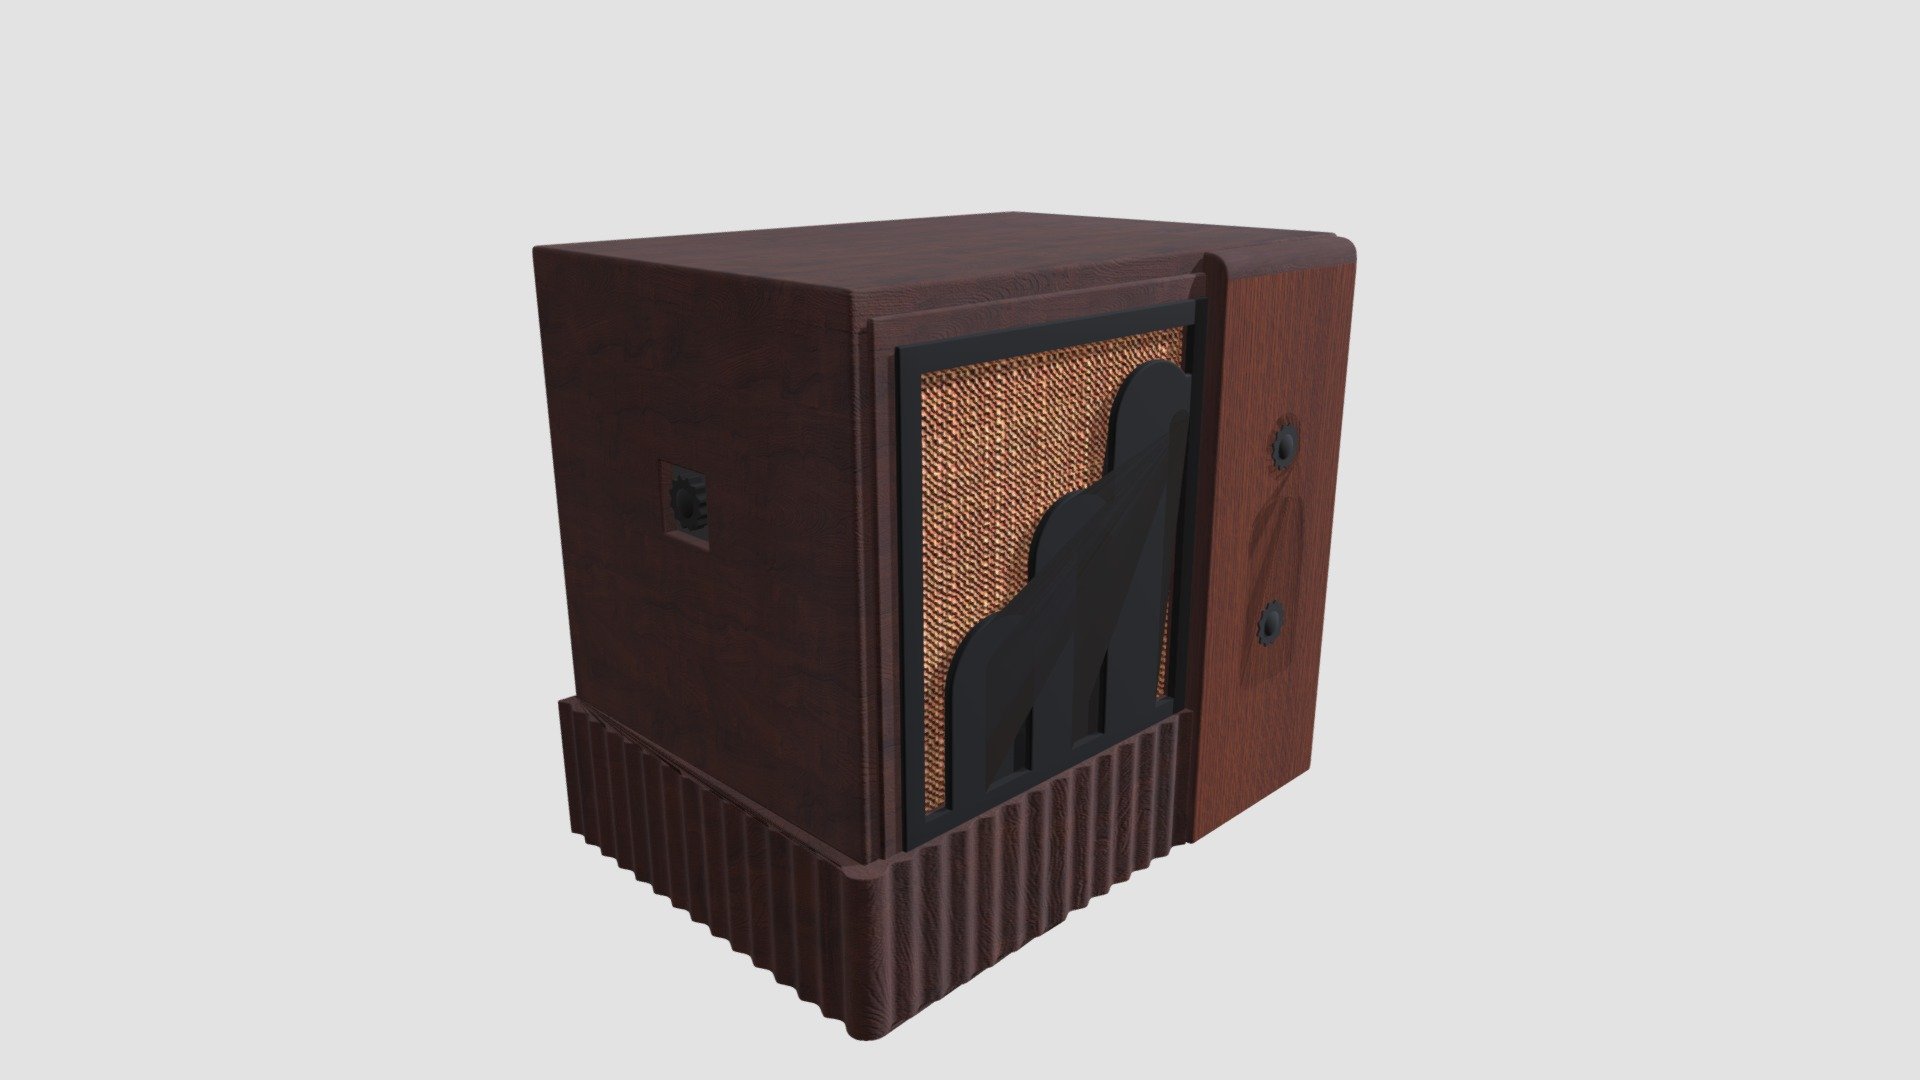 Highly detailed 3d model of radio with all textures, shaders and materials. It is ready to use, just put it into your scene 3d model